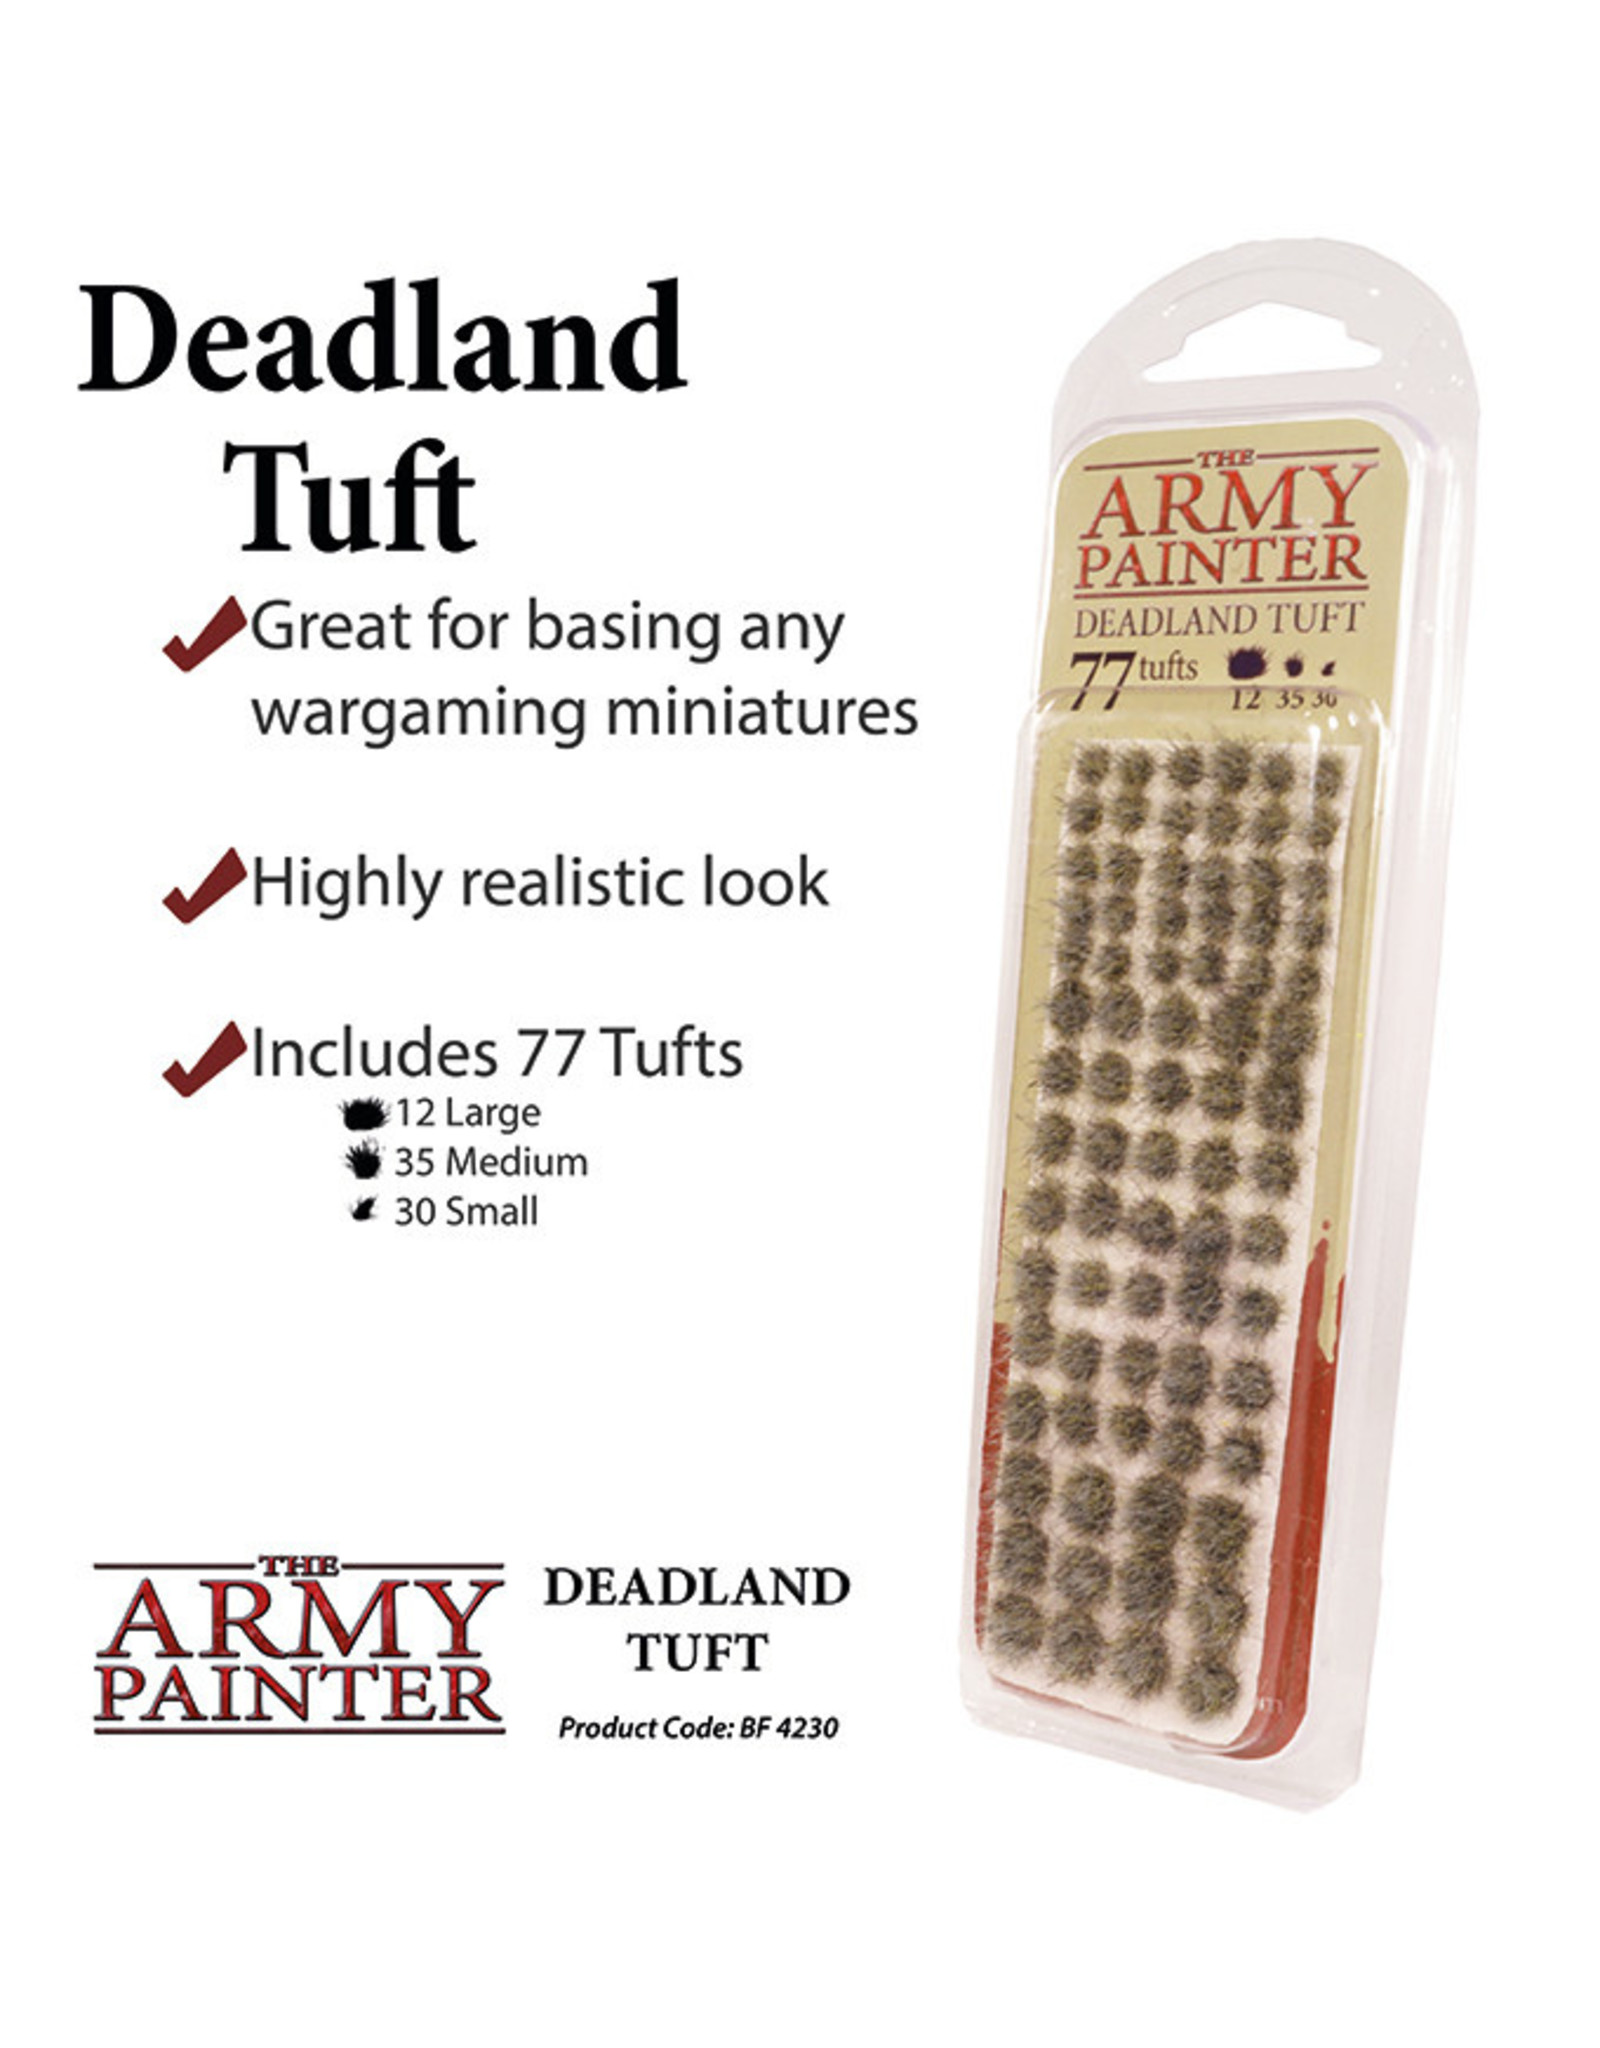 The Army Painter BF4230 Deadland Tuft